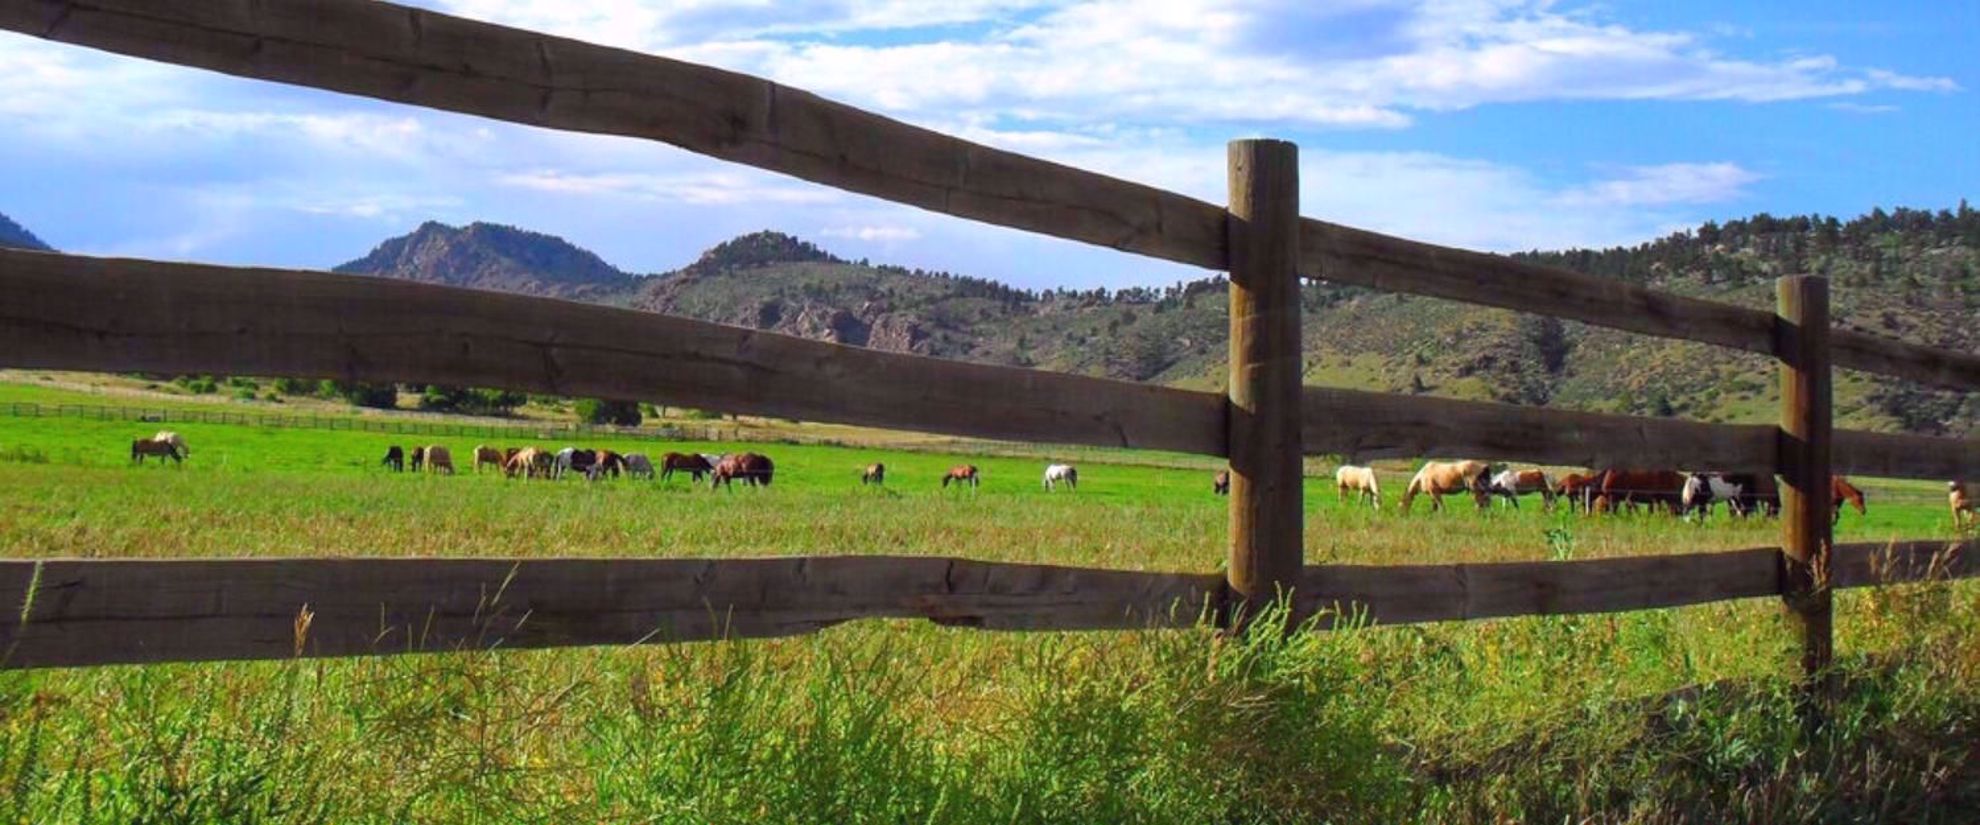 relax on a horseback riding and hiking trip in colorado